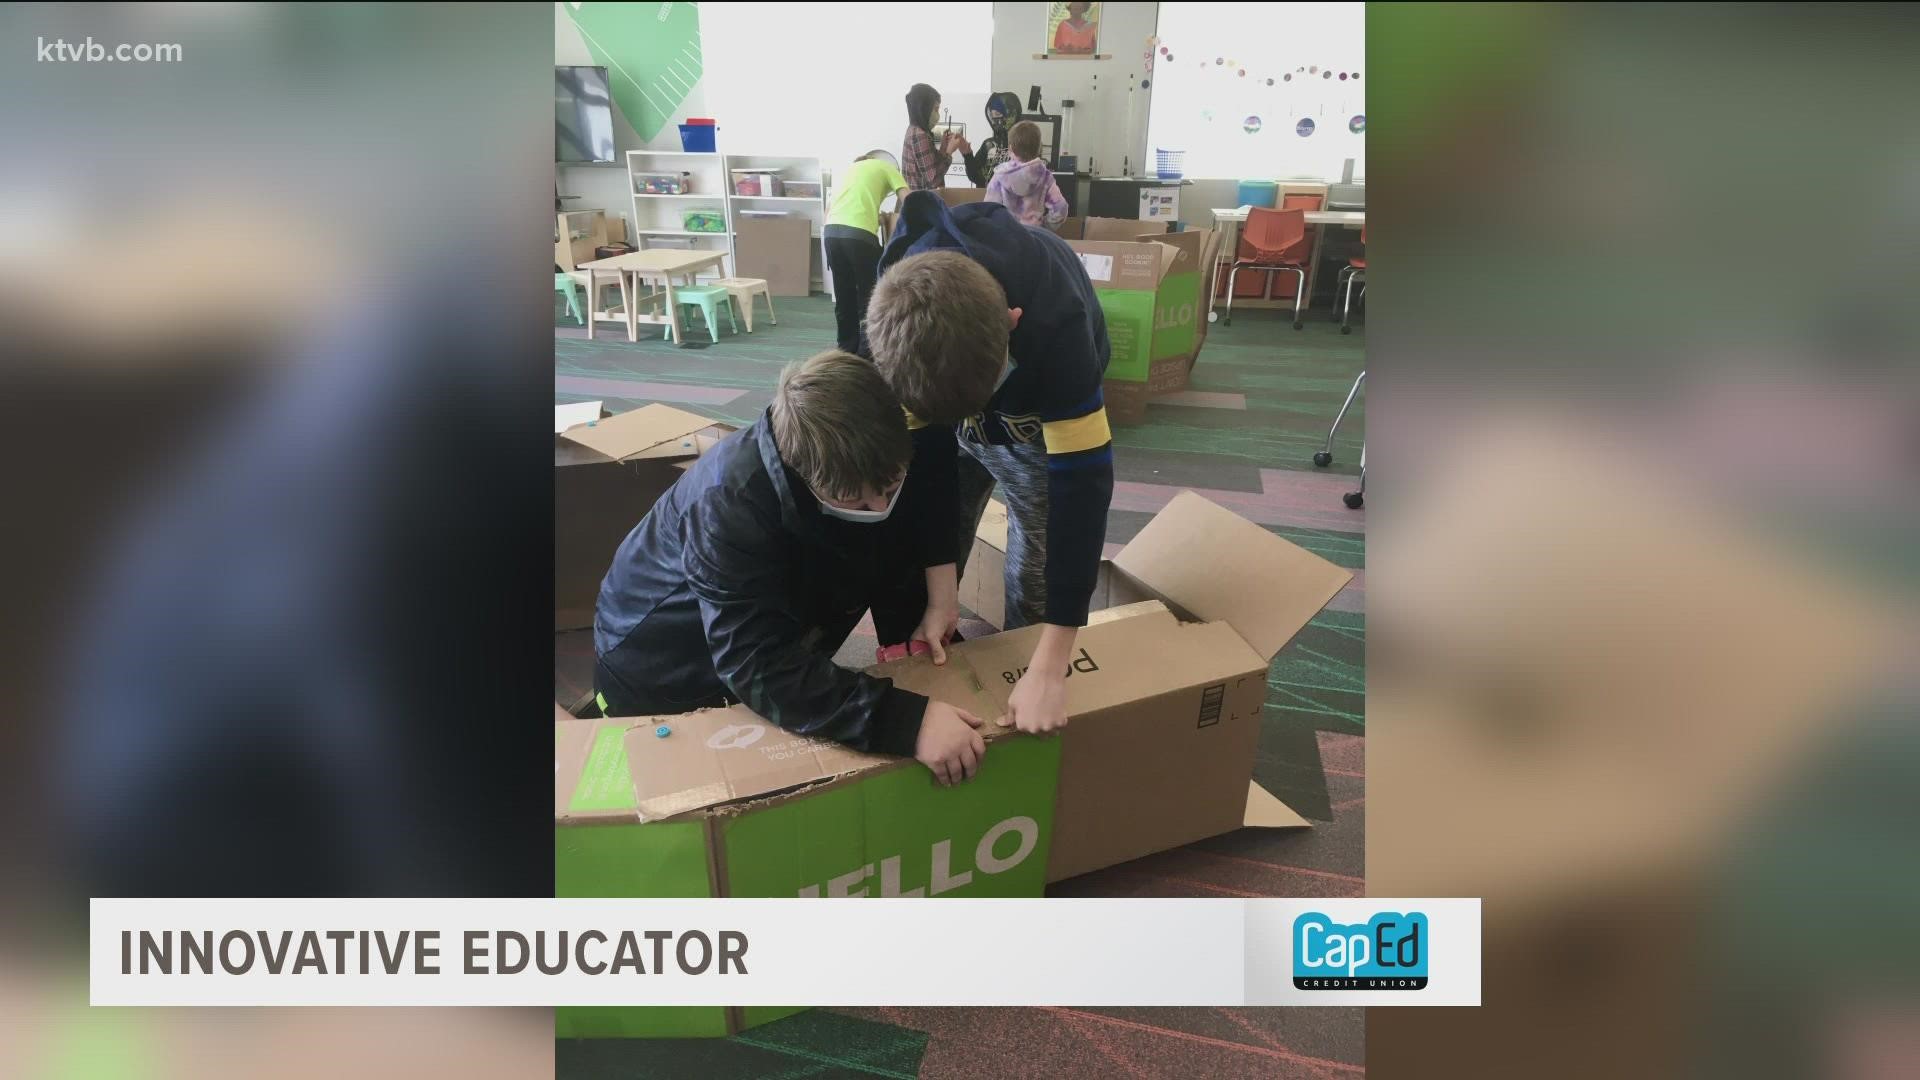 Teacher Allyson Maynard combines creativity, science, math, and even cardboard, to give her young engineers exciting new learning experiences.